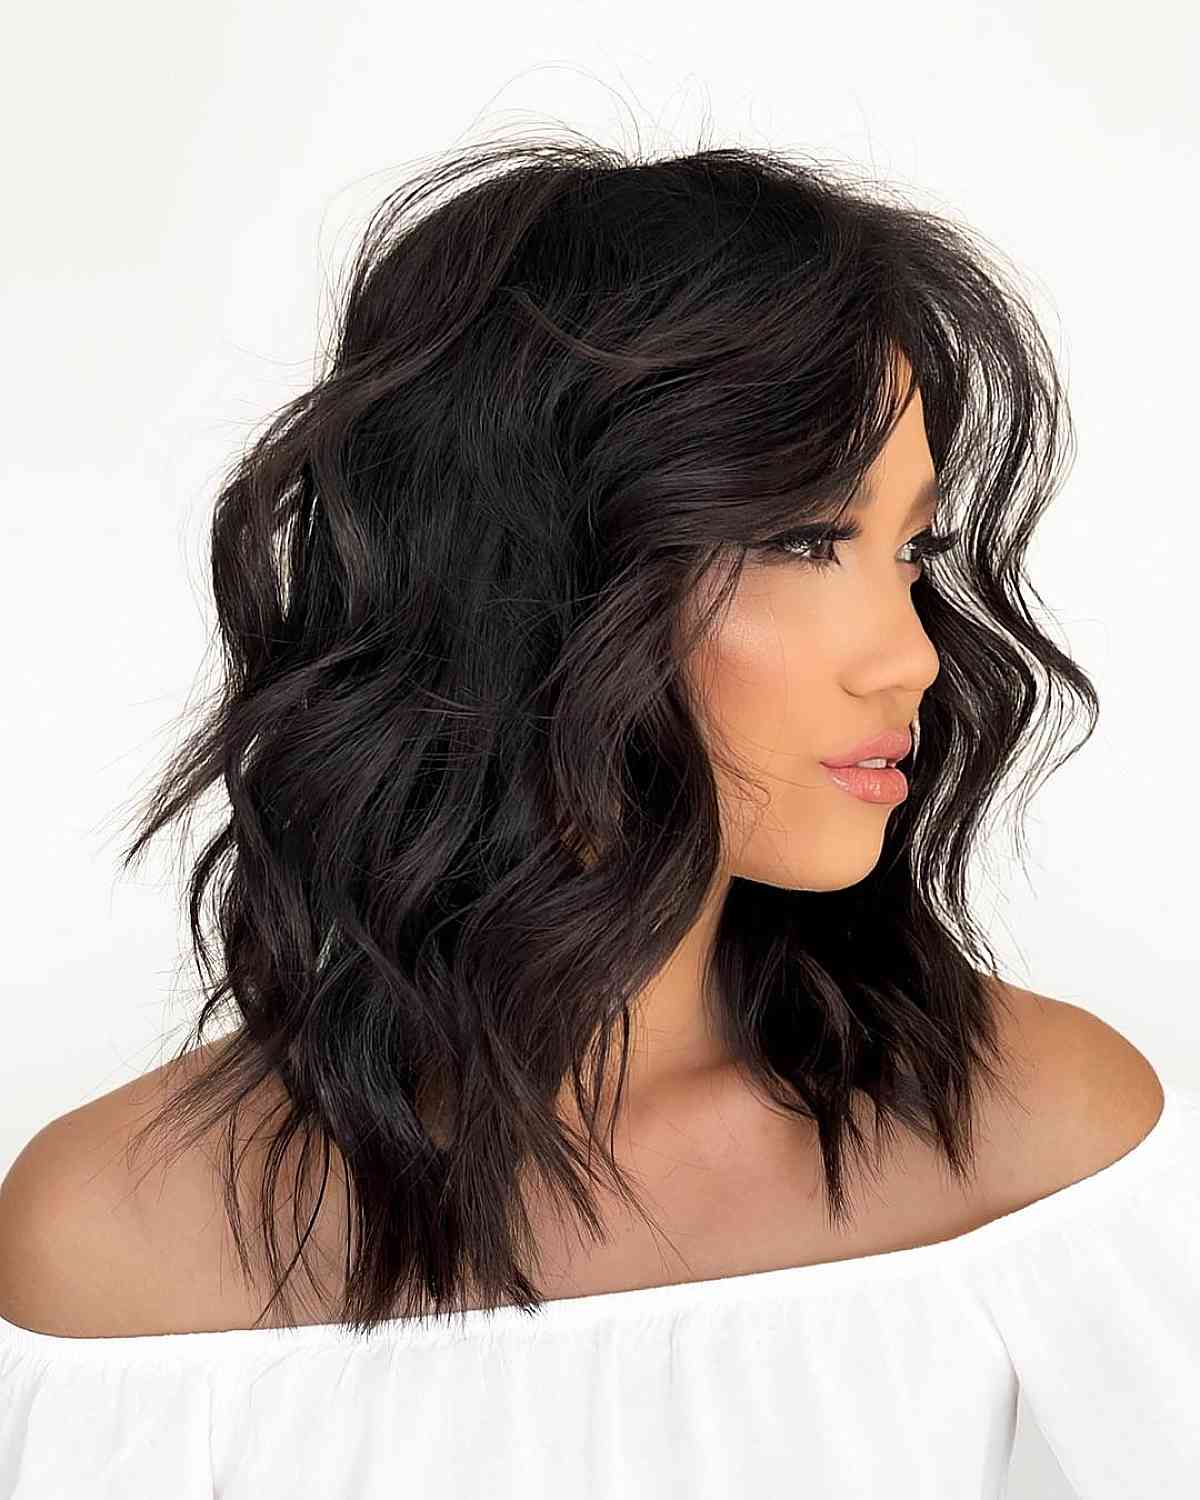 A simple wavy shag haircut for women over 30